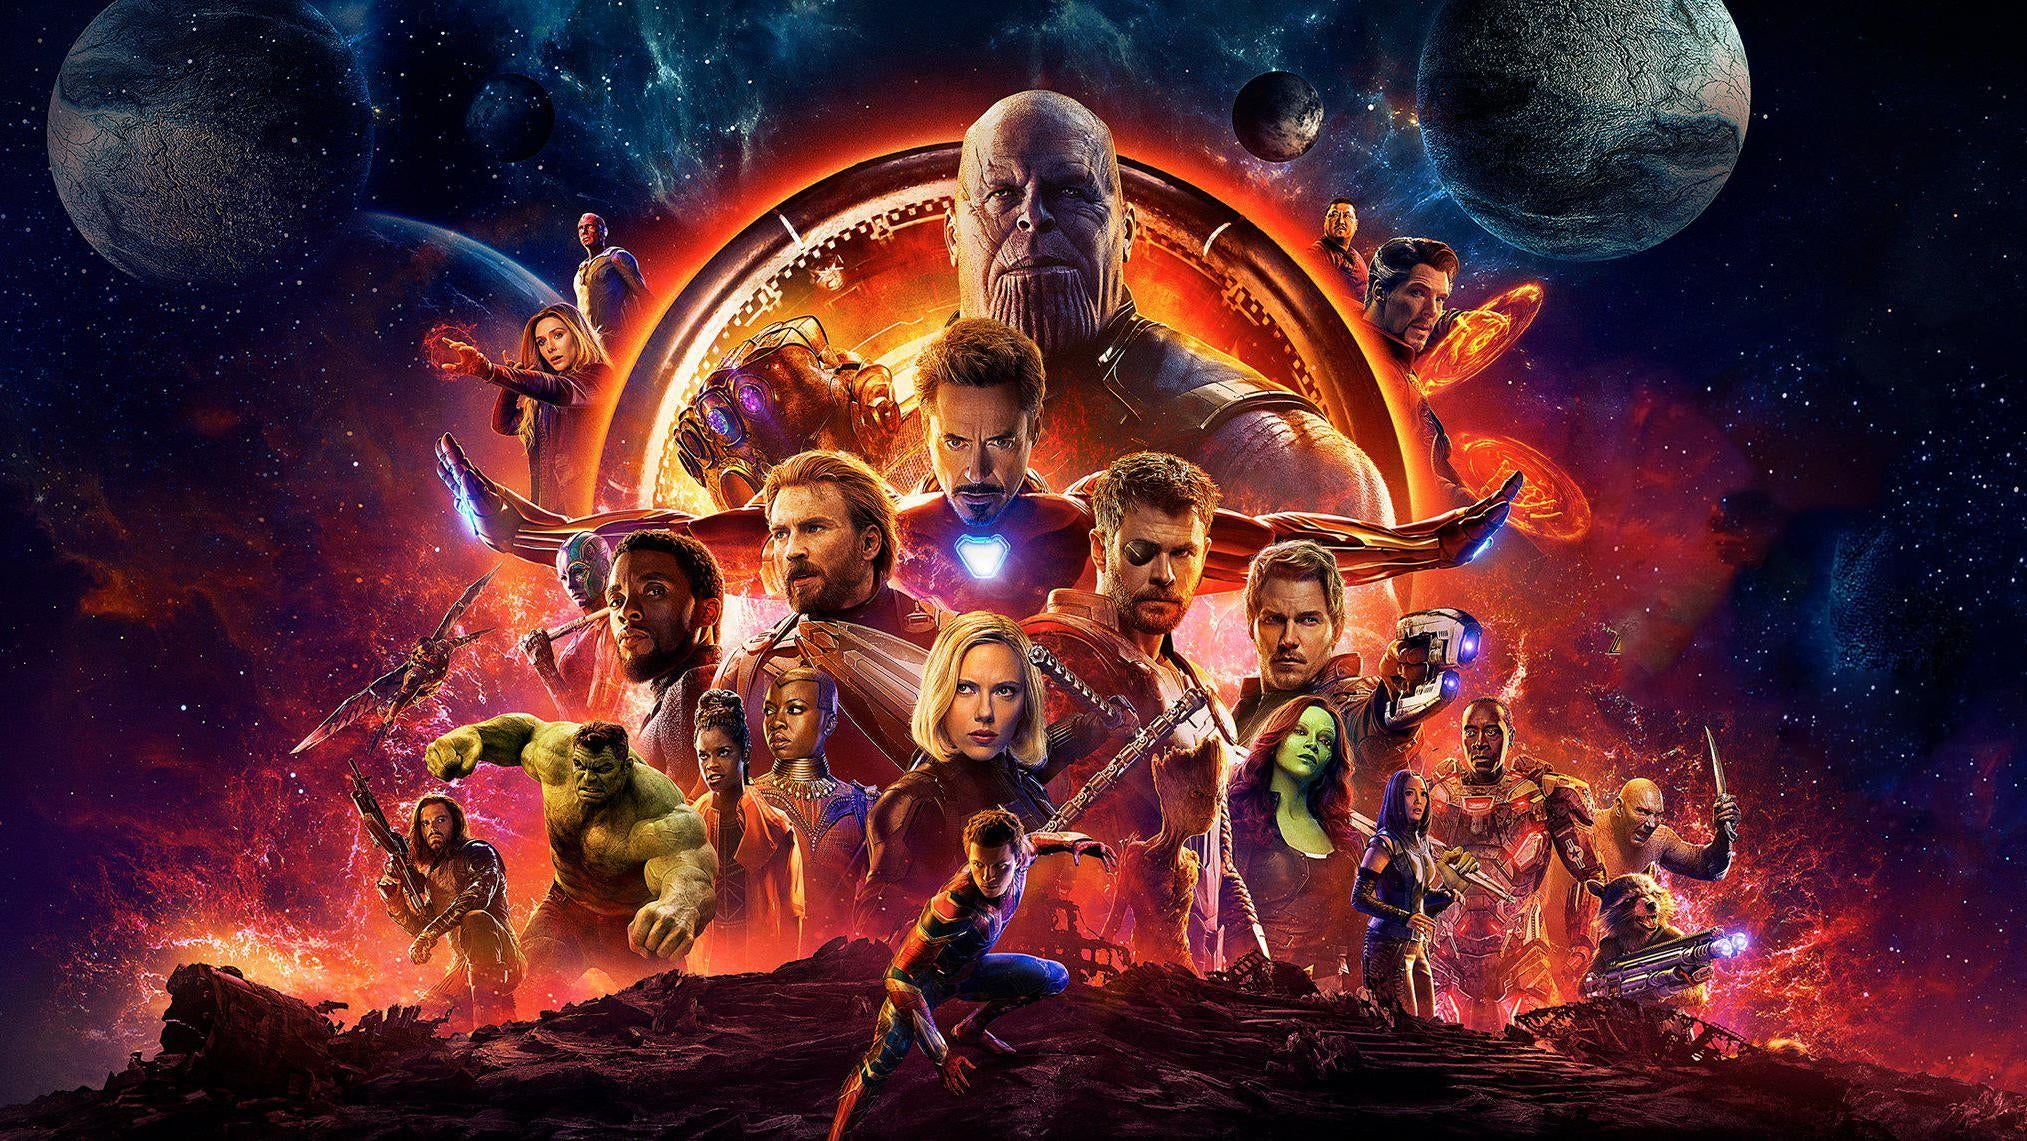 The Secrets We Learned From The Avengers: Infinity War Home Release